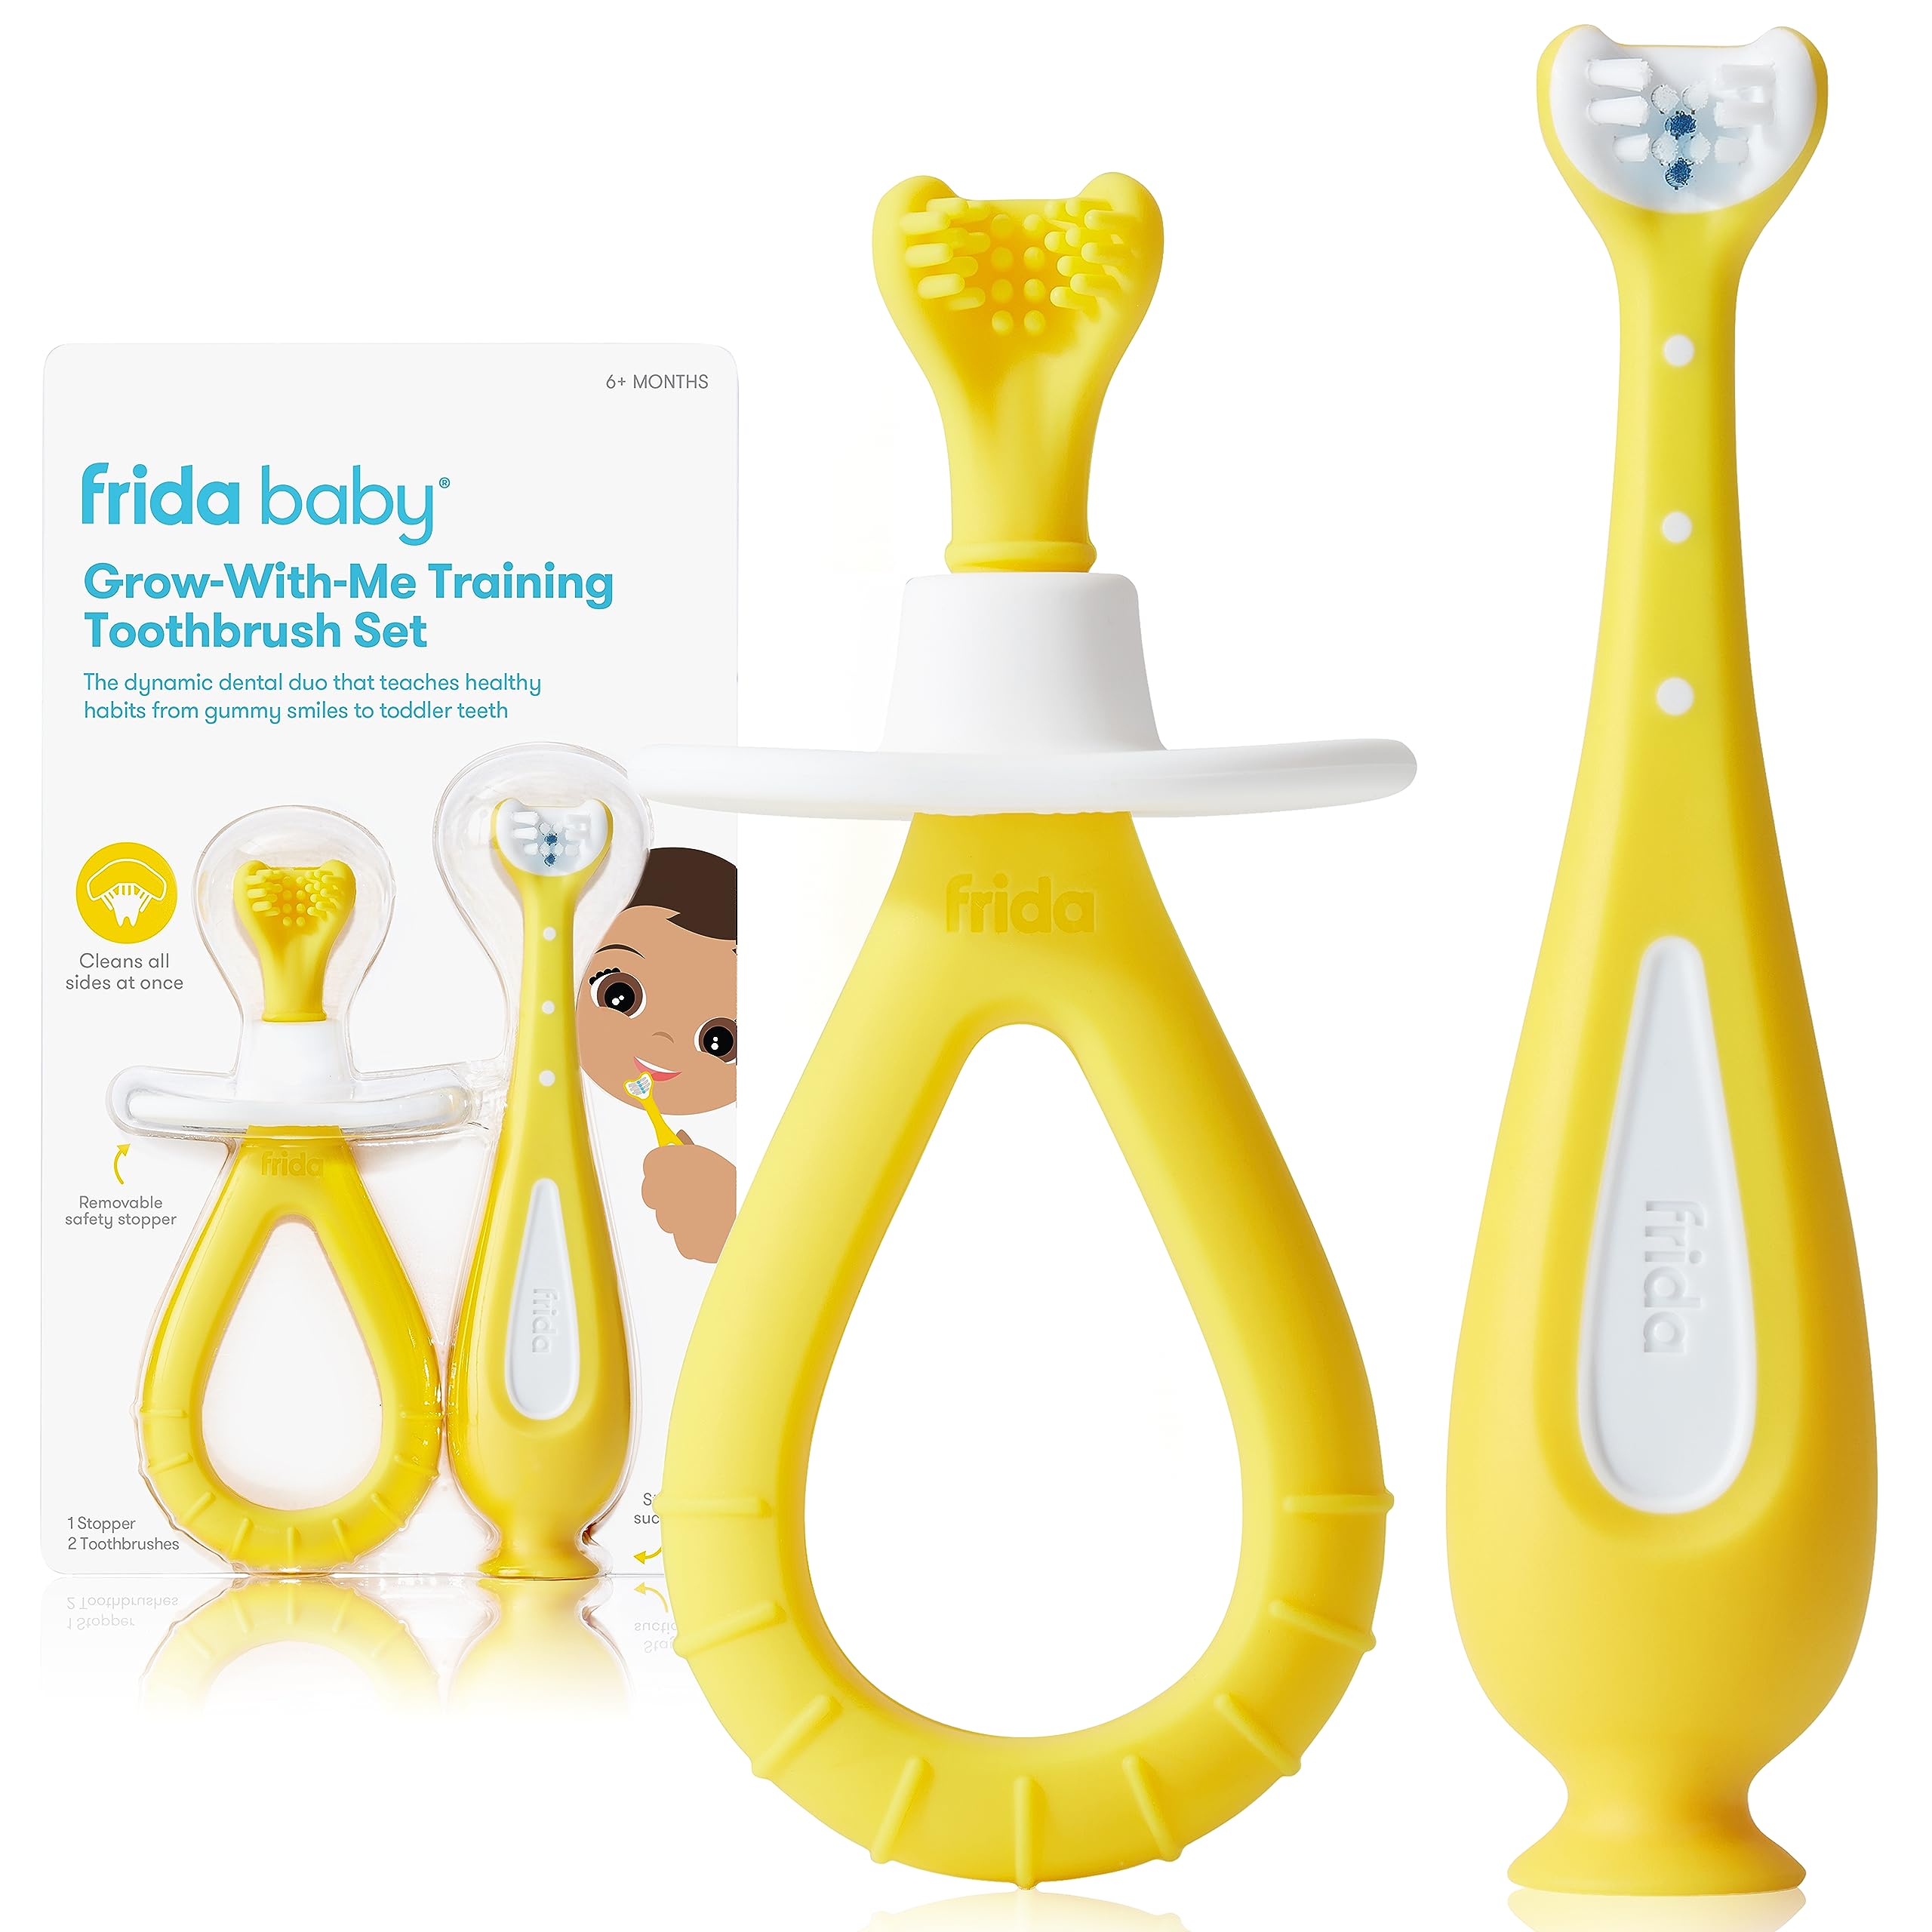 Frida Baby Grow-with-Me Training Toothbrush Set | Infant to Toddler Toothbrush Oral Care for Sensitive Gums